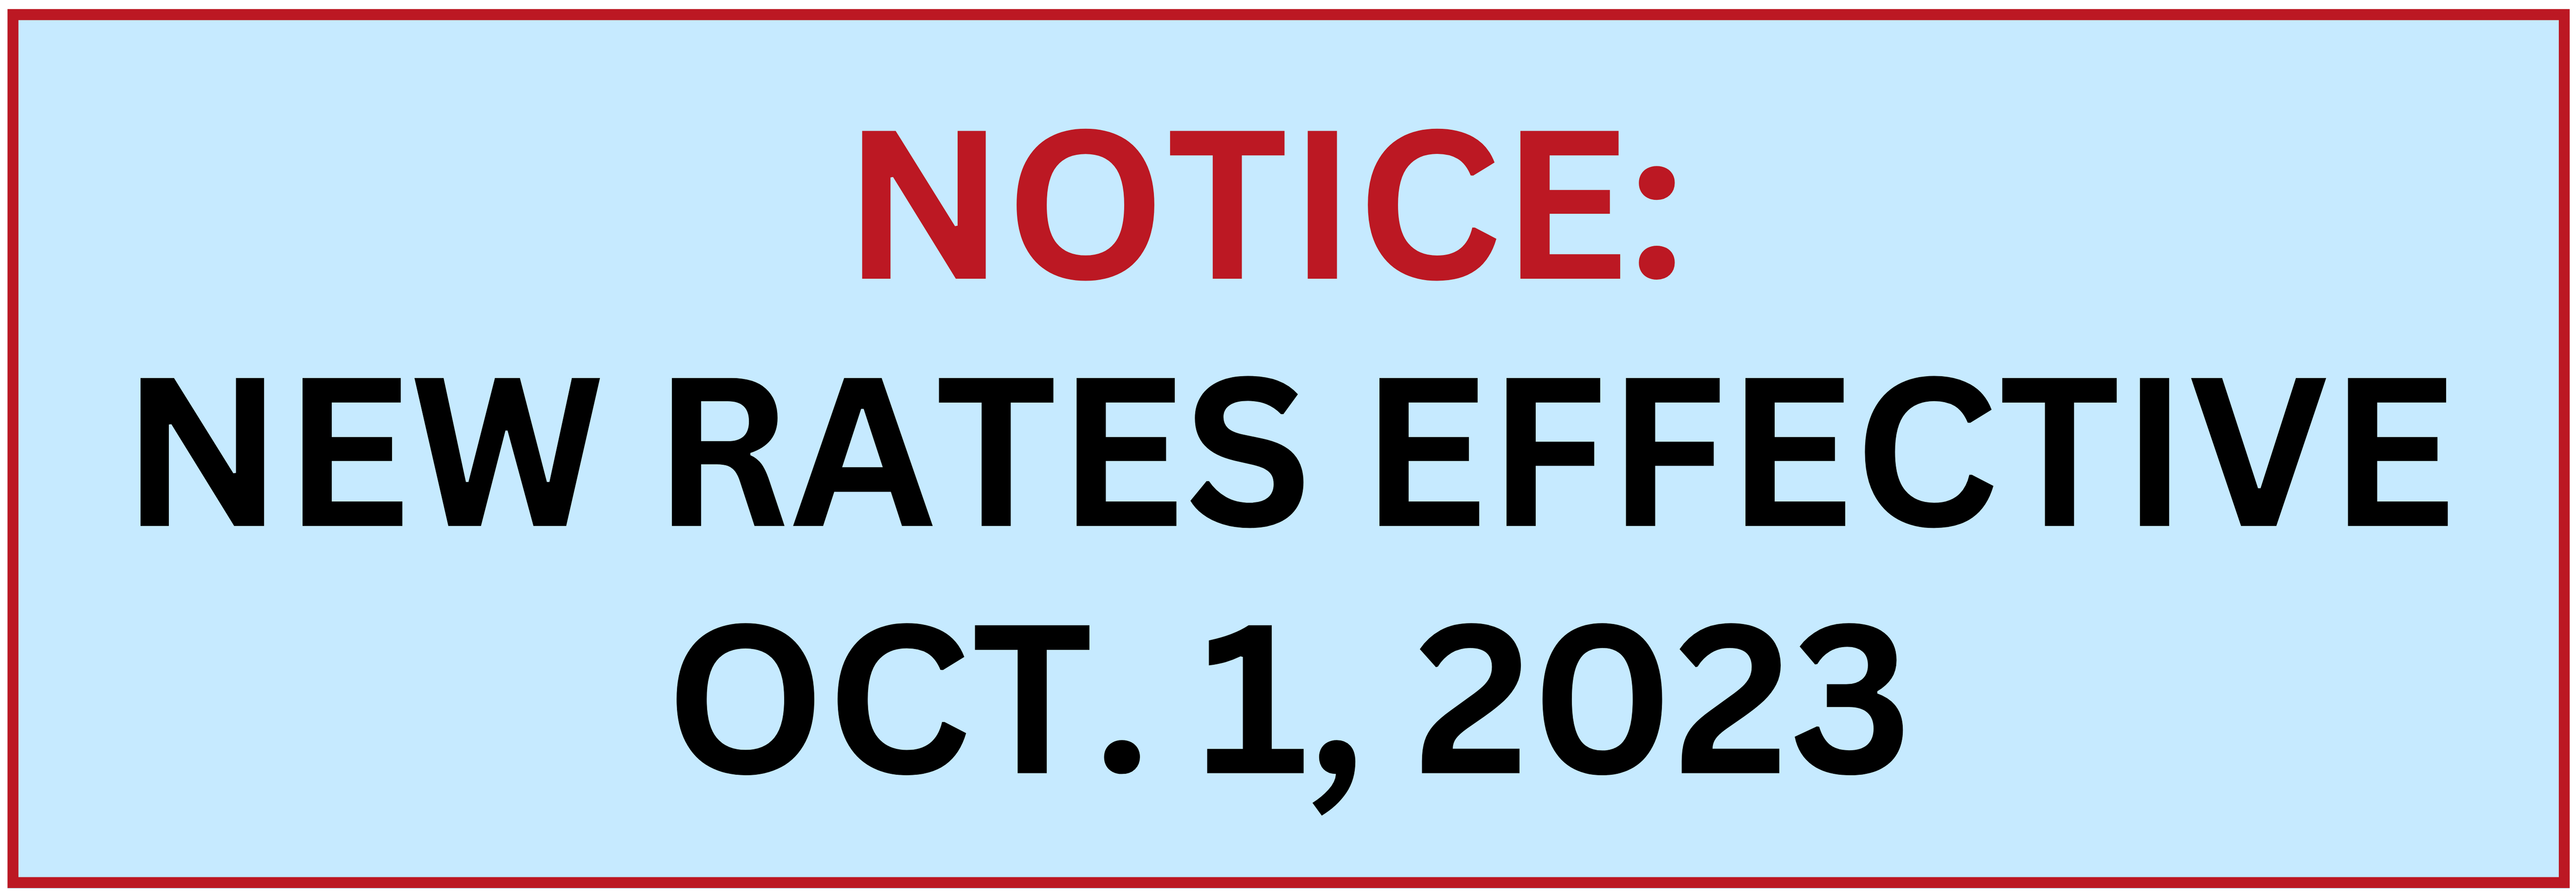 NEW RATES EFFECTIVE OCT. 1 2023 3